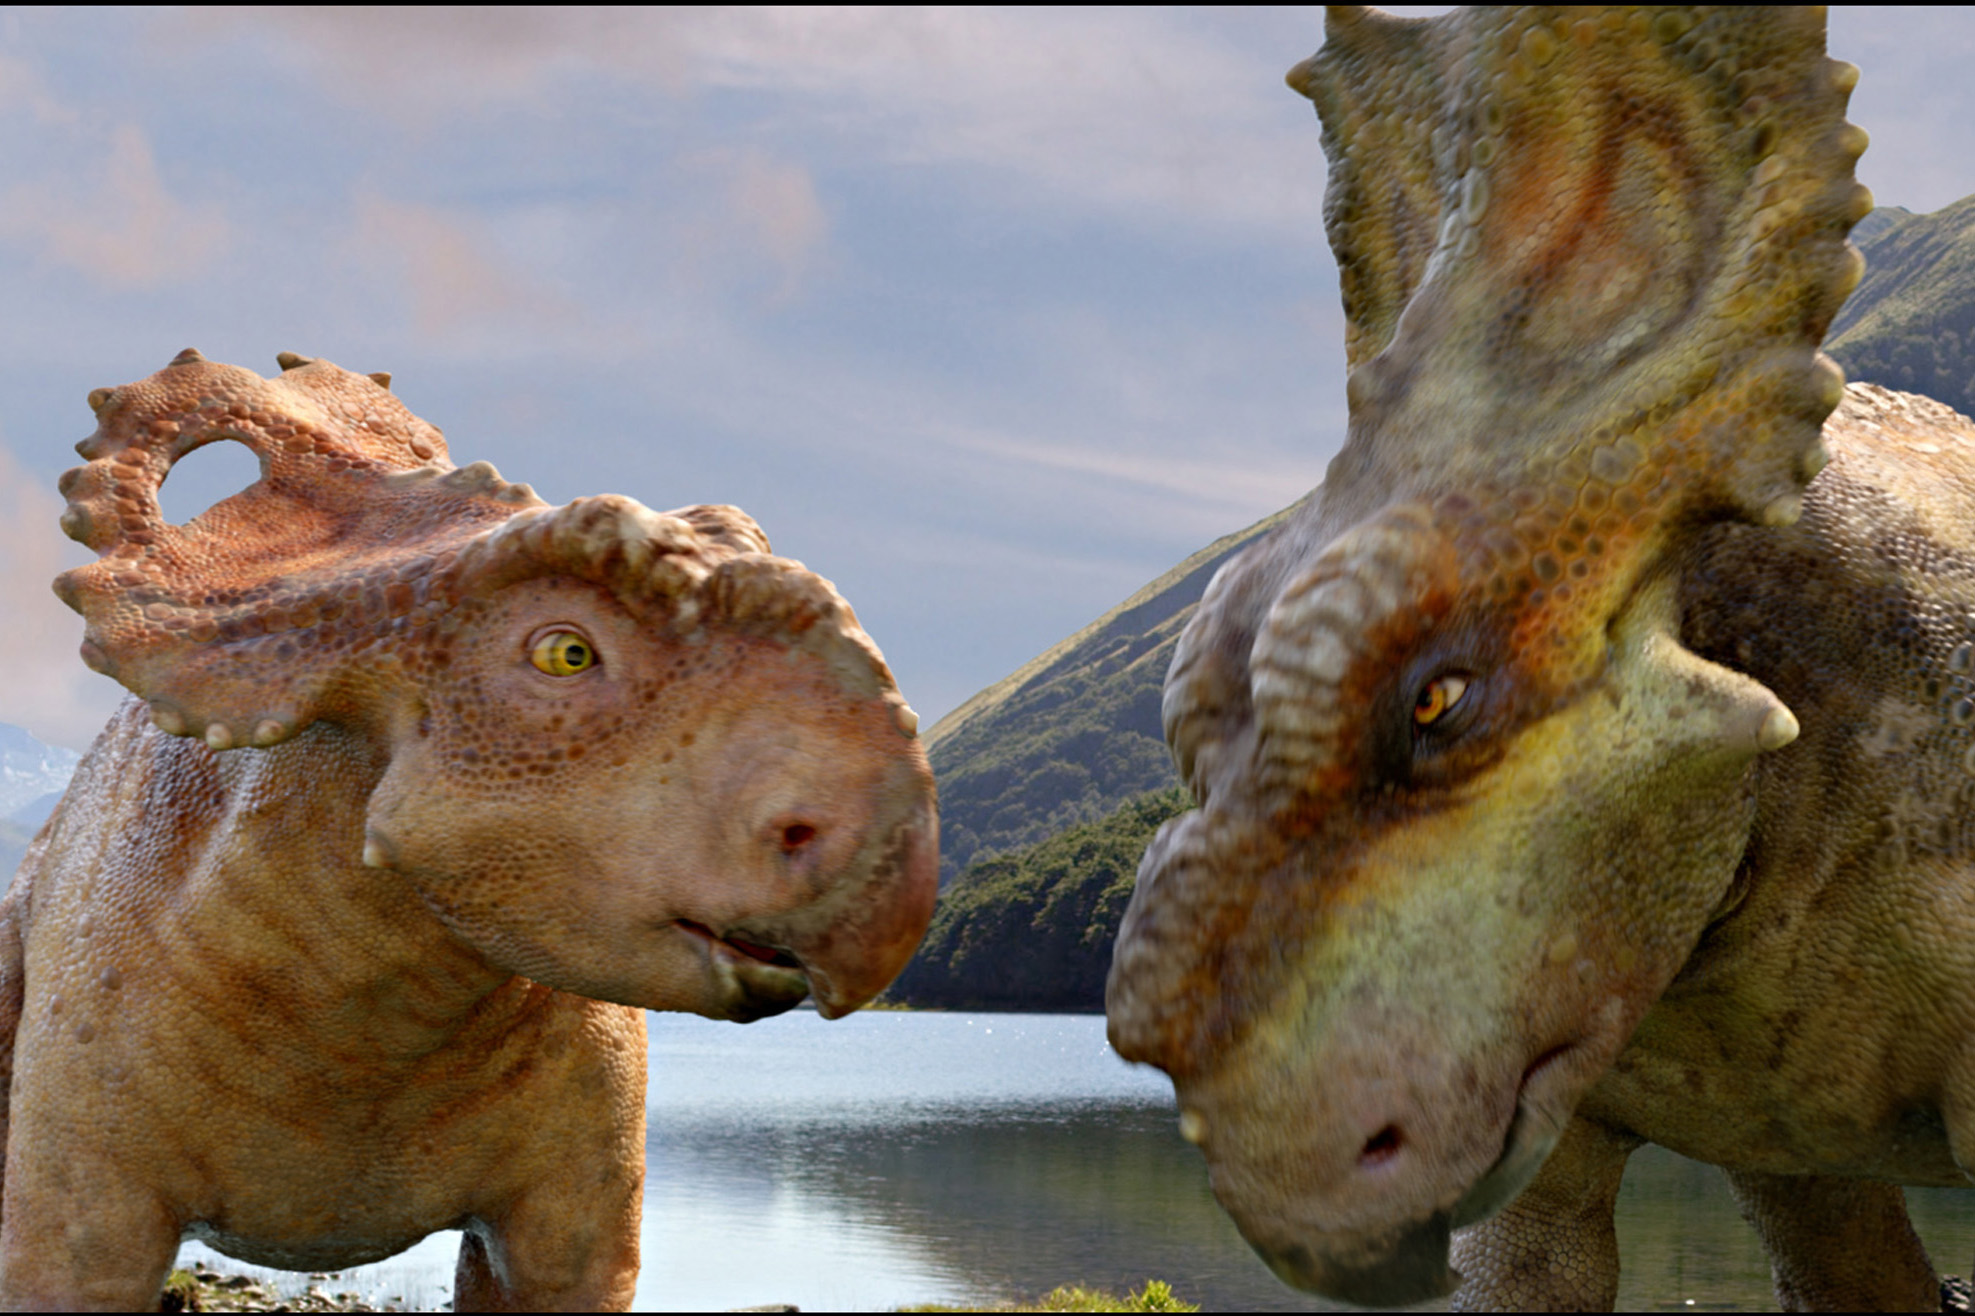 Walking With Dinosaurs Pics, Movie Collection